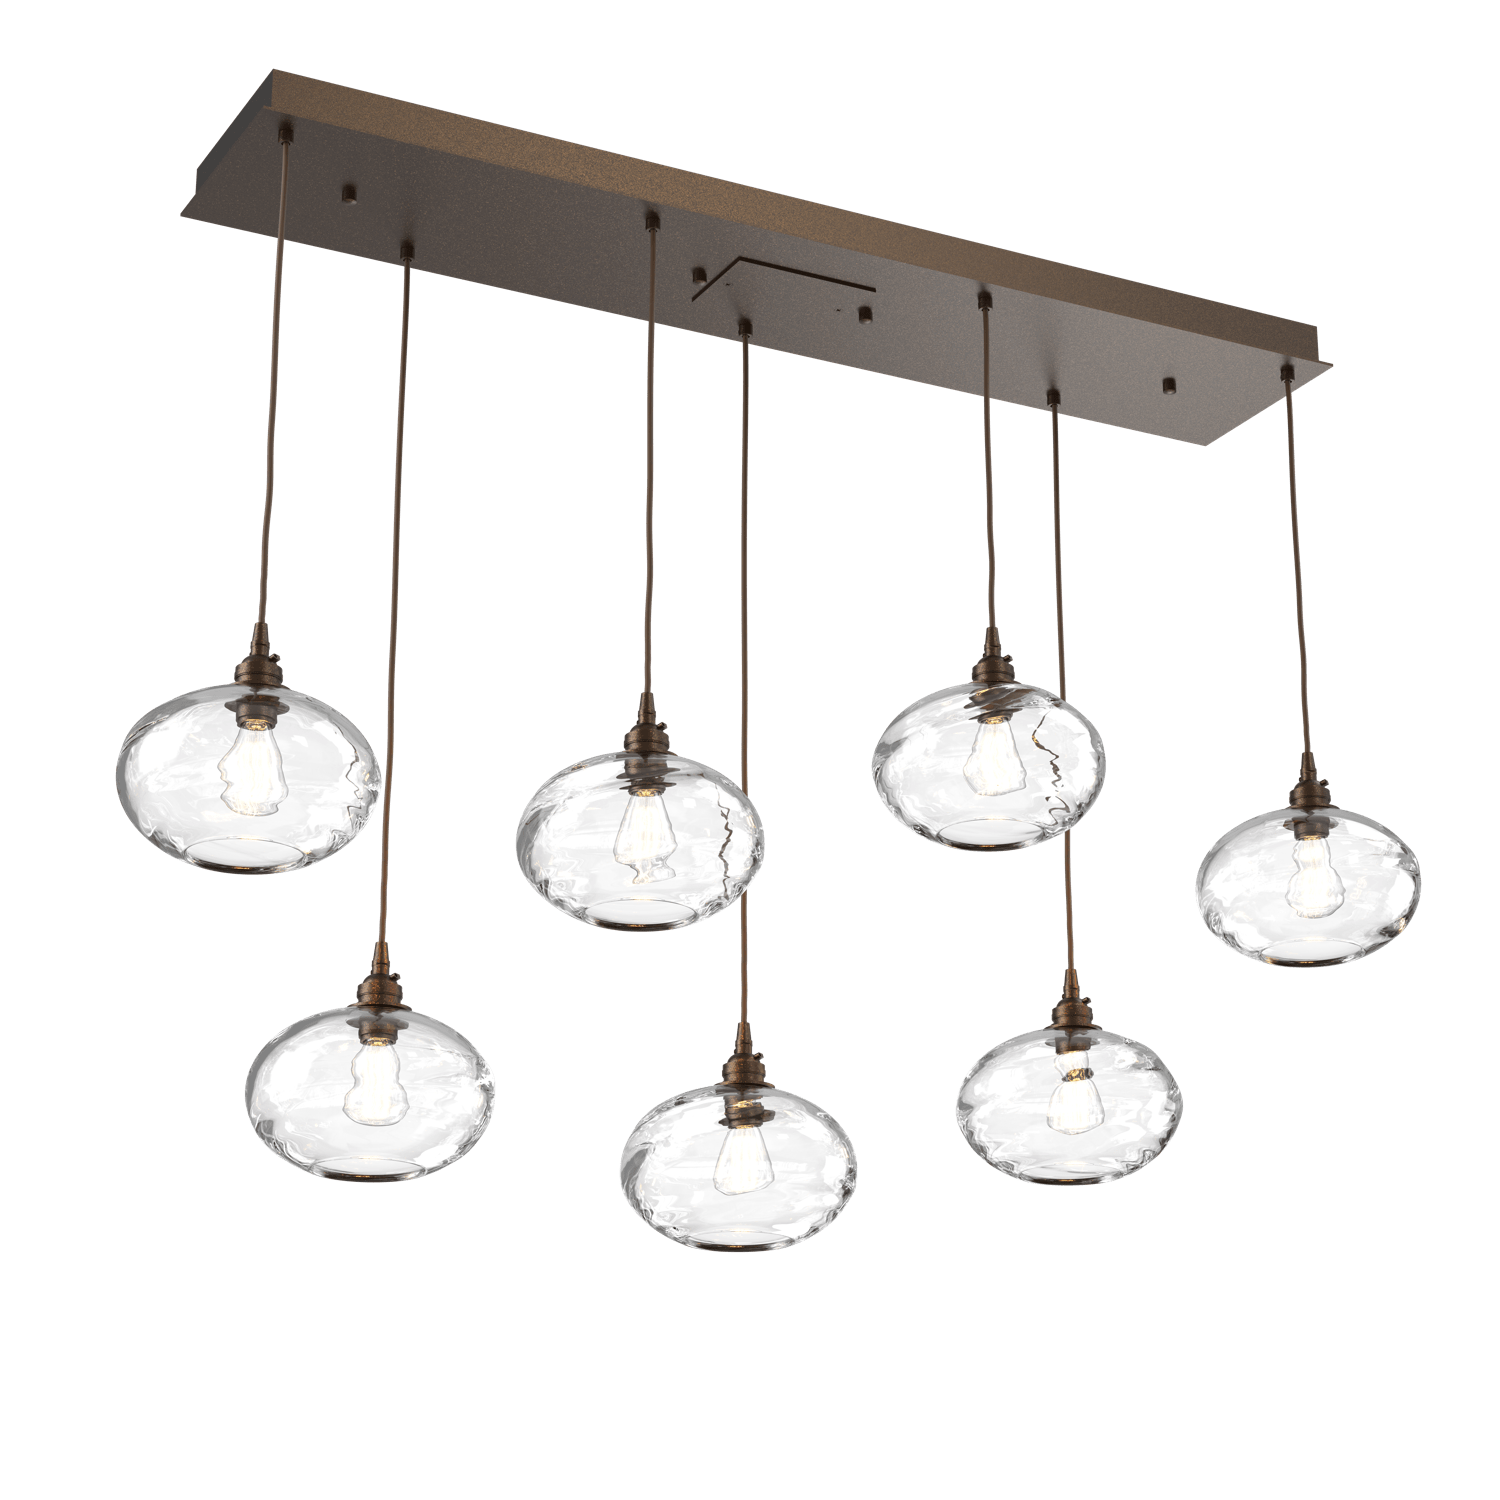 PLB0036-07-FB-OC-Hammerton-Studio-Optic-Blown-Glass-Coppa-7-light-linear-pendant-chandelier-with-flat-bronze-finish-and-optic-clear-blown-glass-shades-and-incandescent-lamping